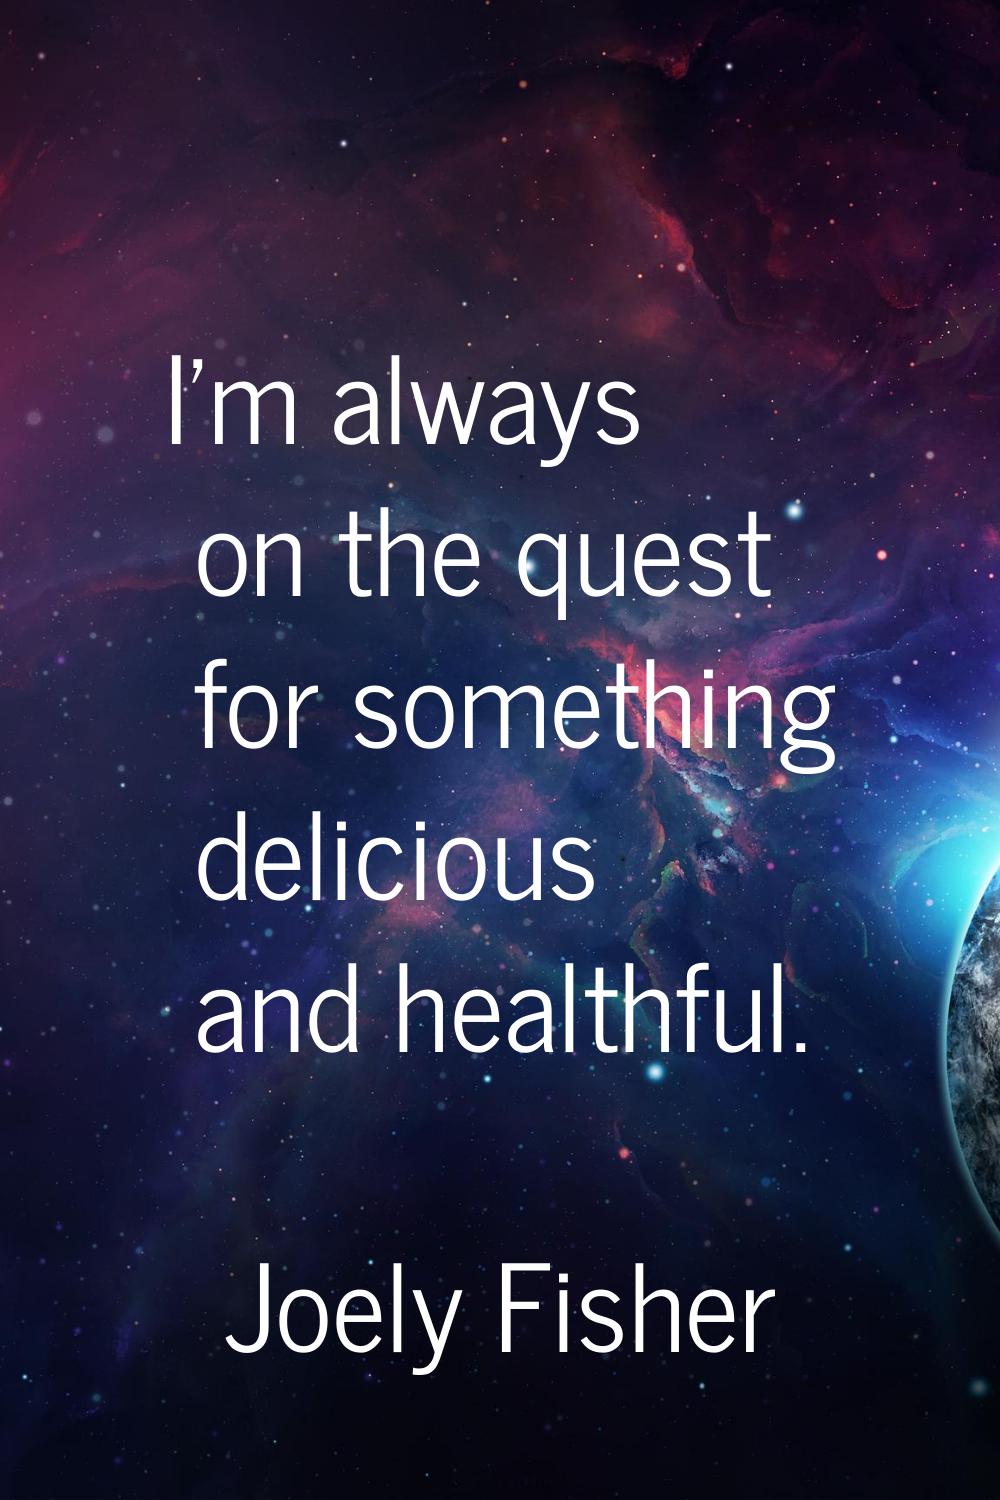 I'm always on the quest for something delicious and healthful.